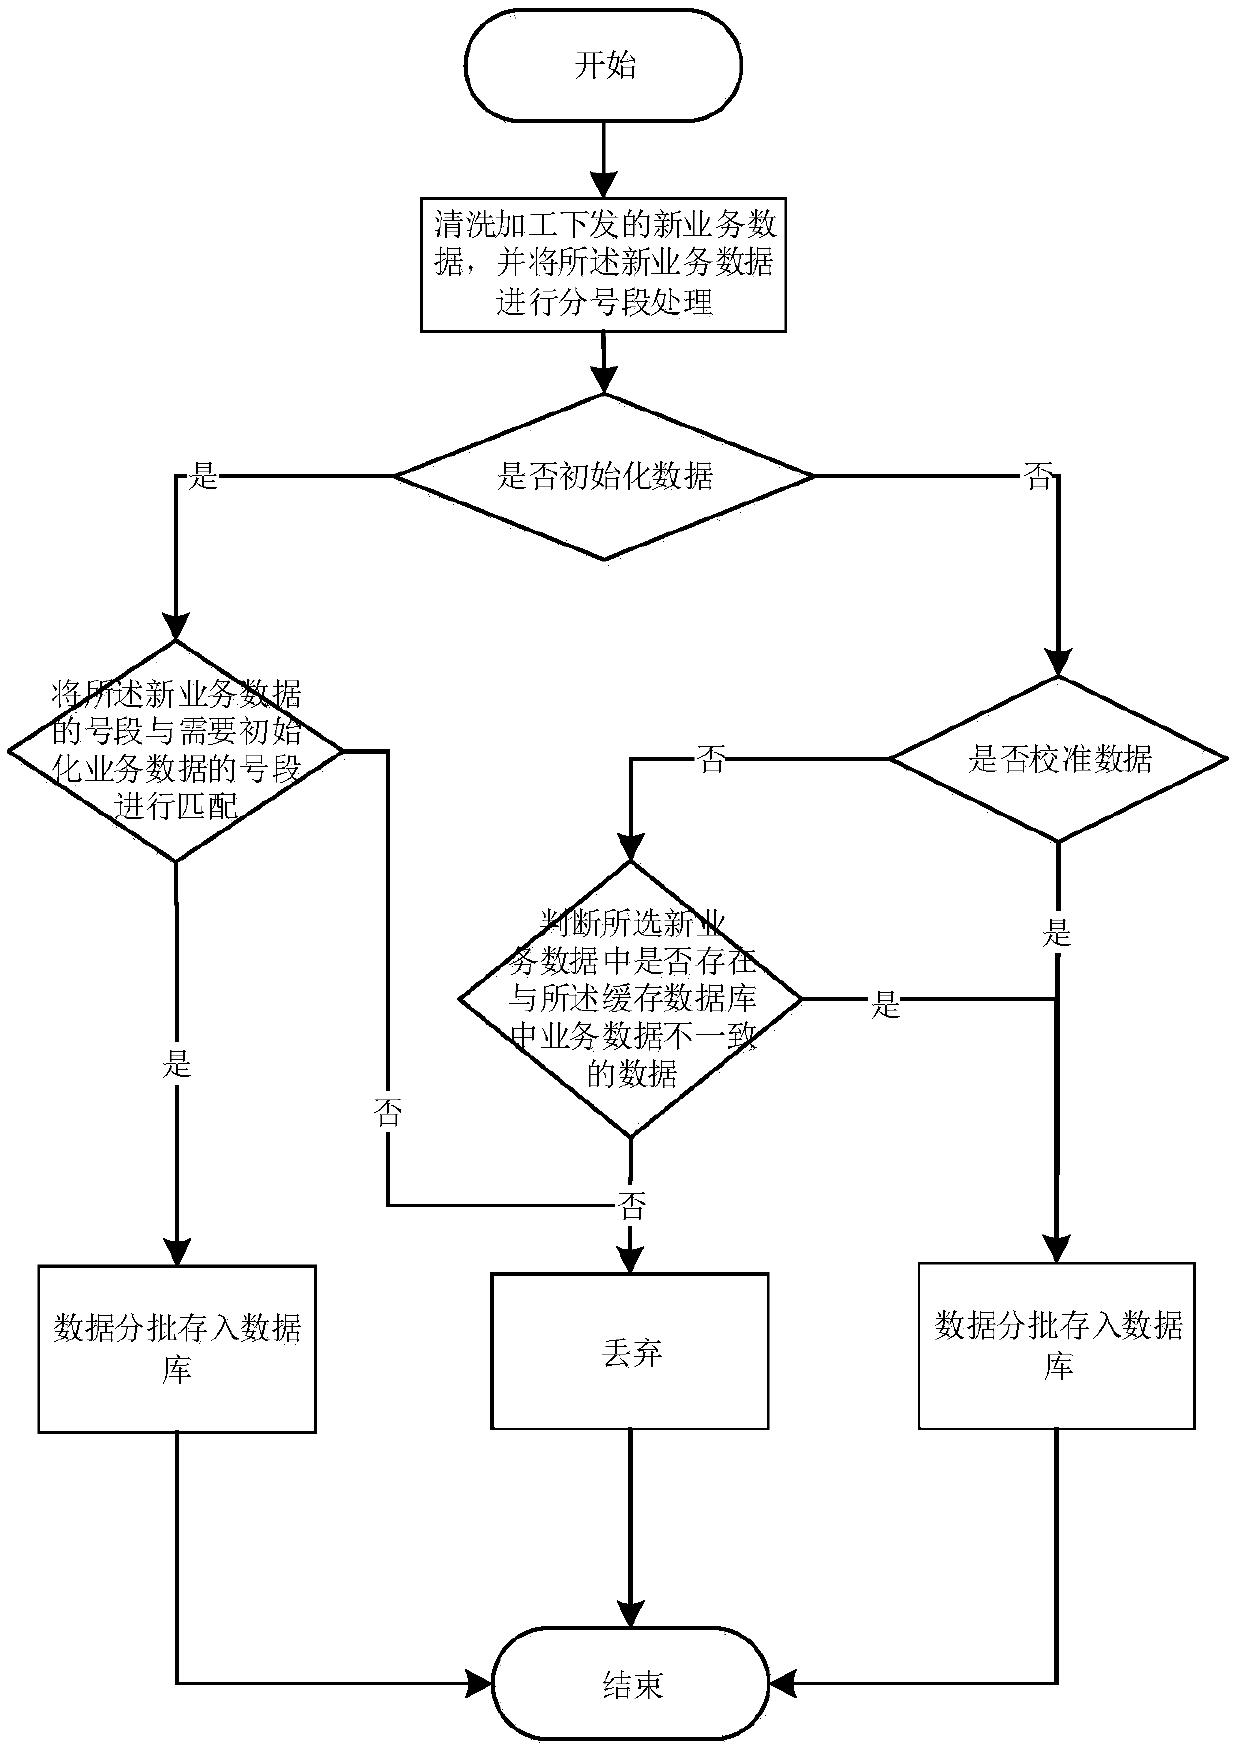 A database processing method and system